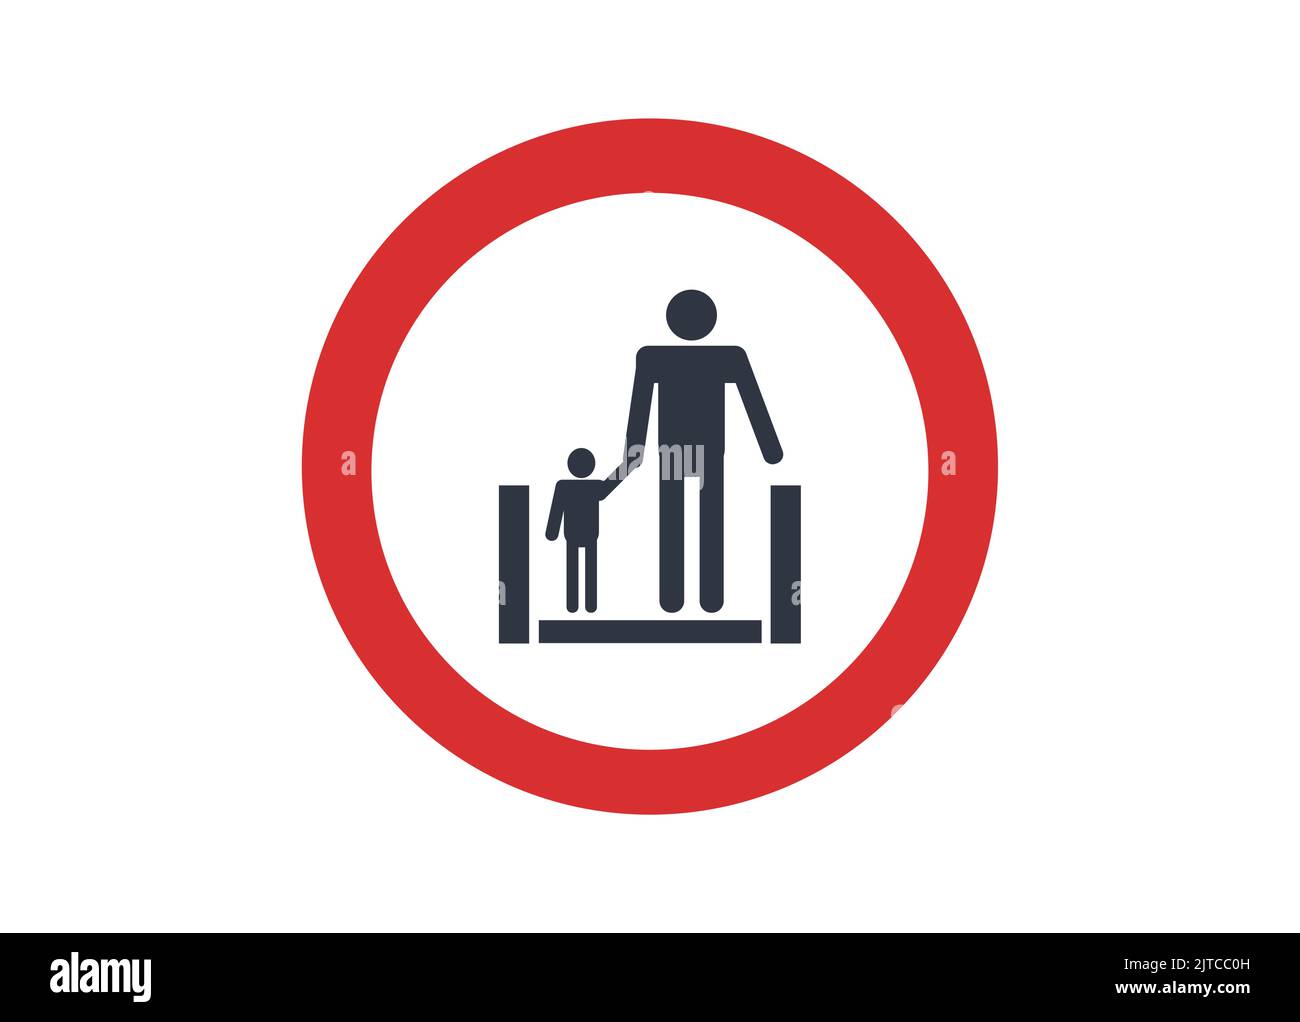 Hold the child's hand on the escalator icon. Stock Vector